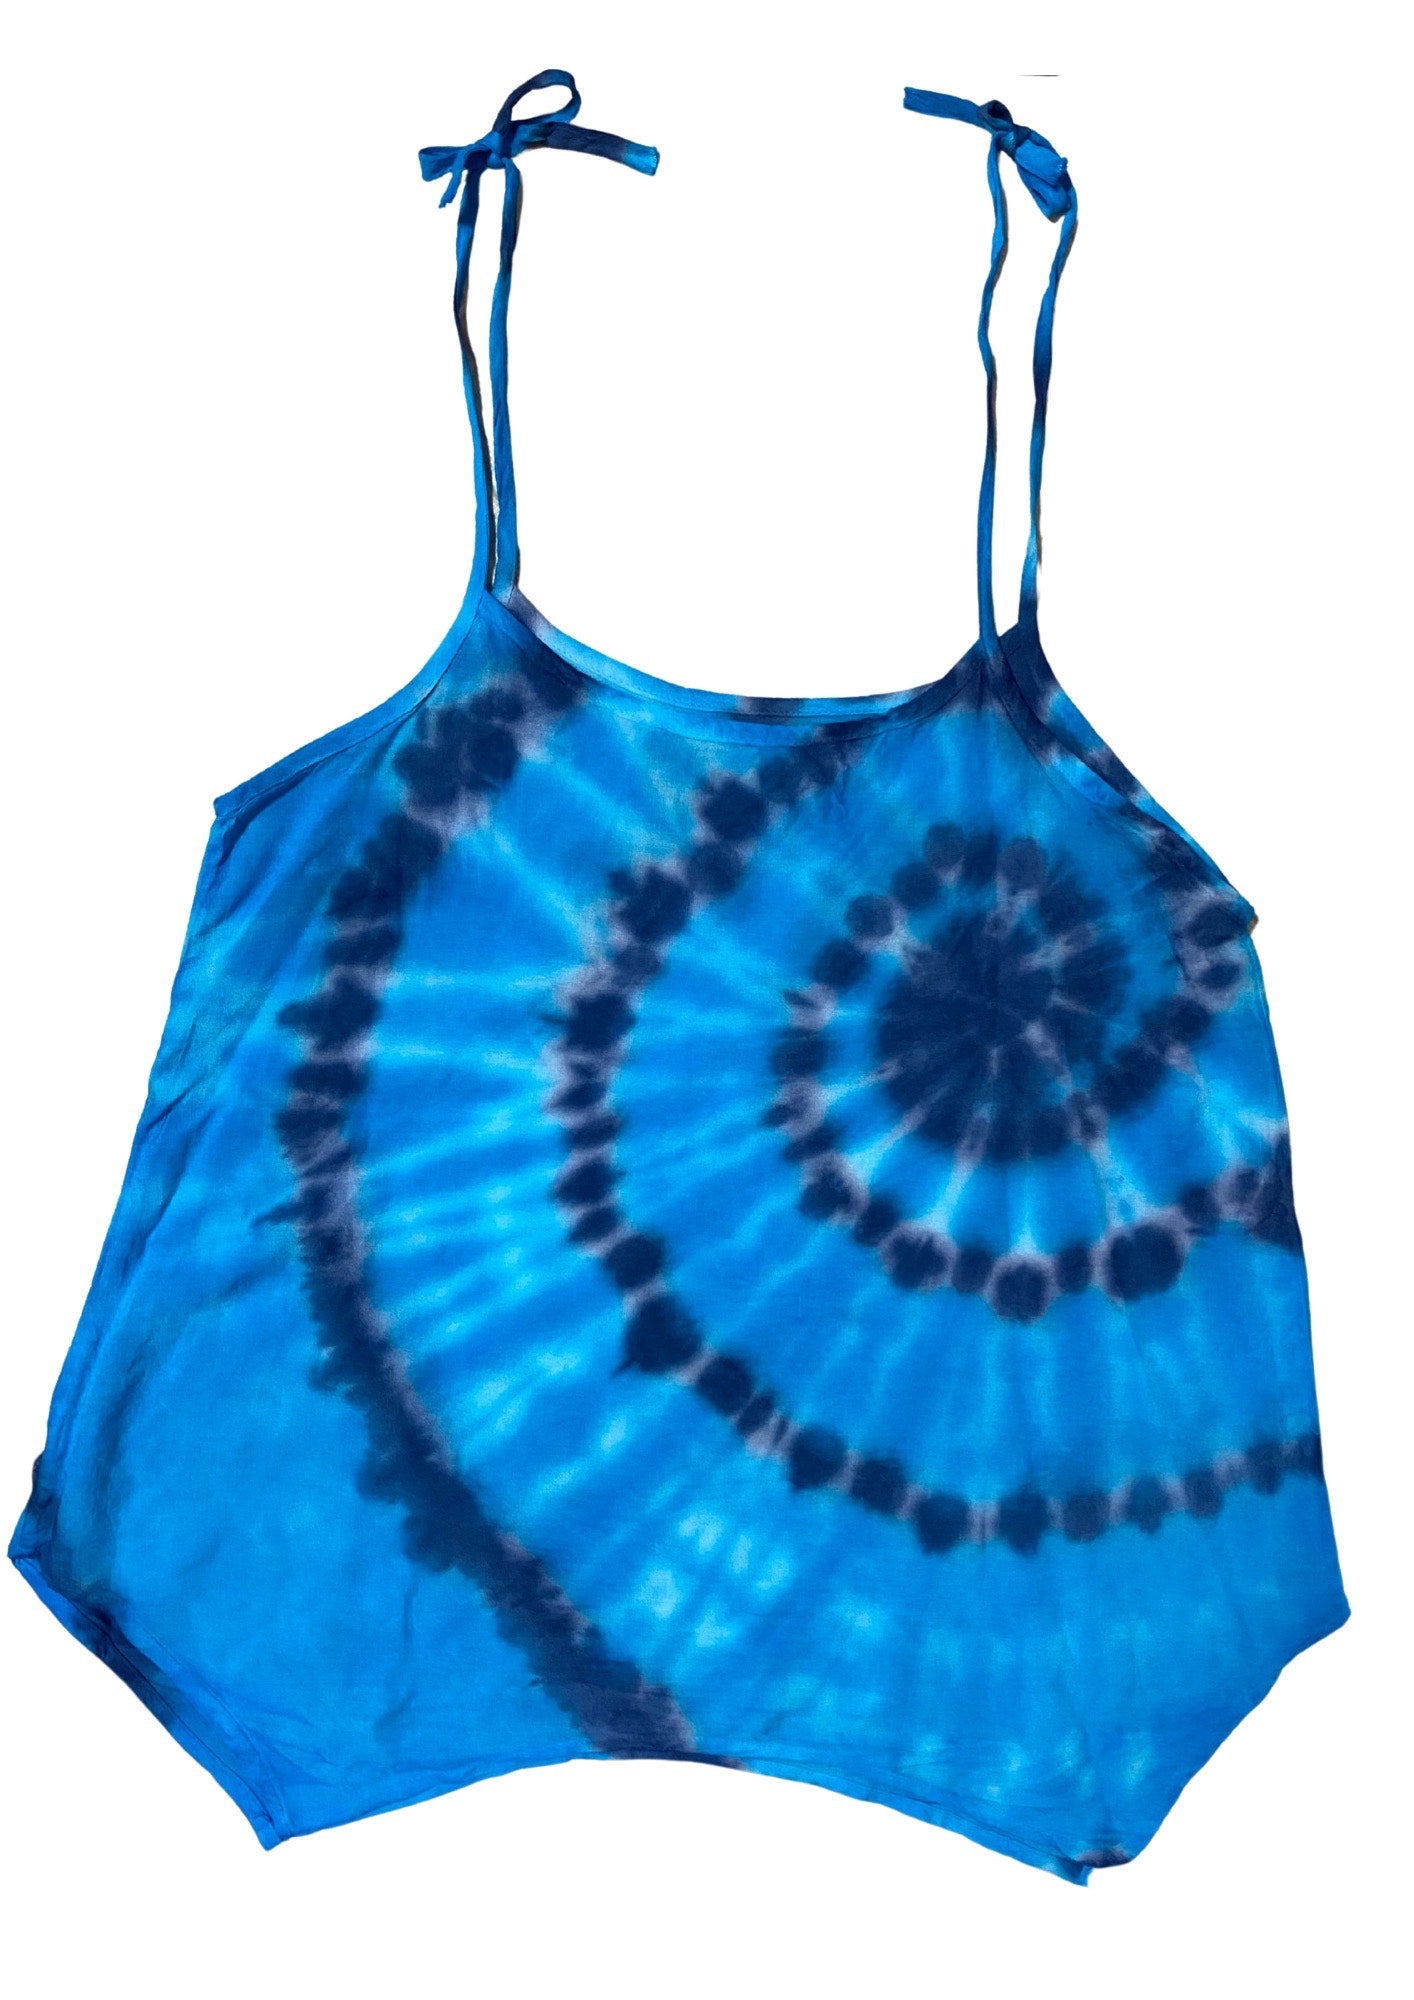 Cami Camisole Teen & Women, One Size Free Size Fit 0 to 8, Handmade Tie Dyed - Blue Wave